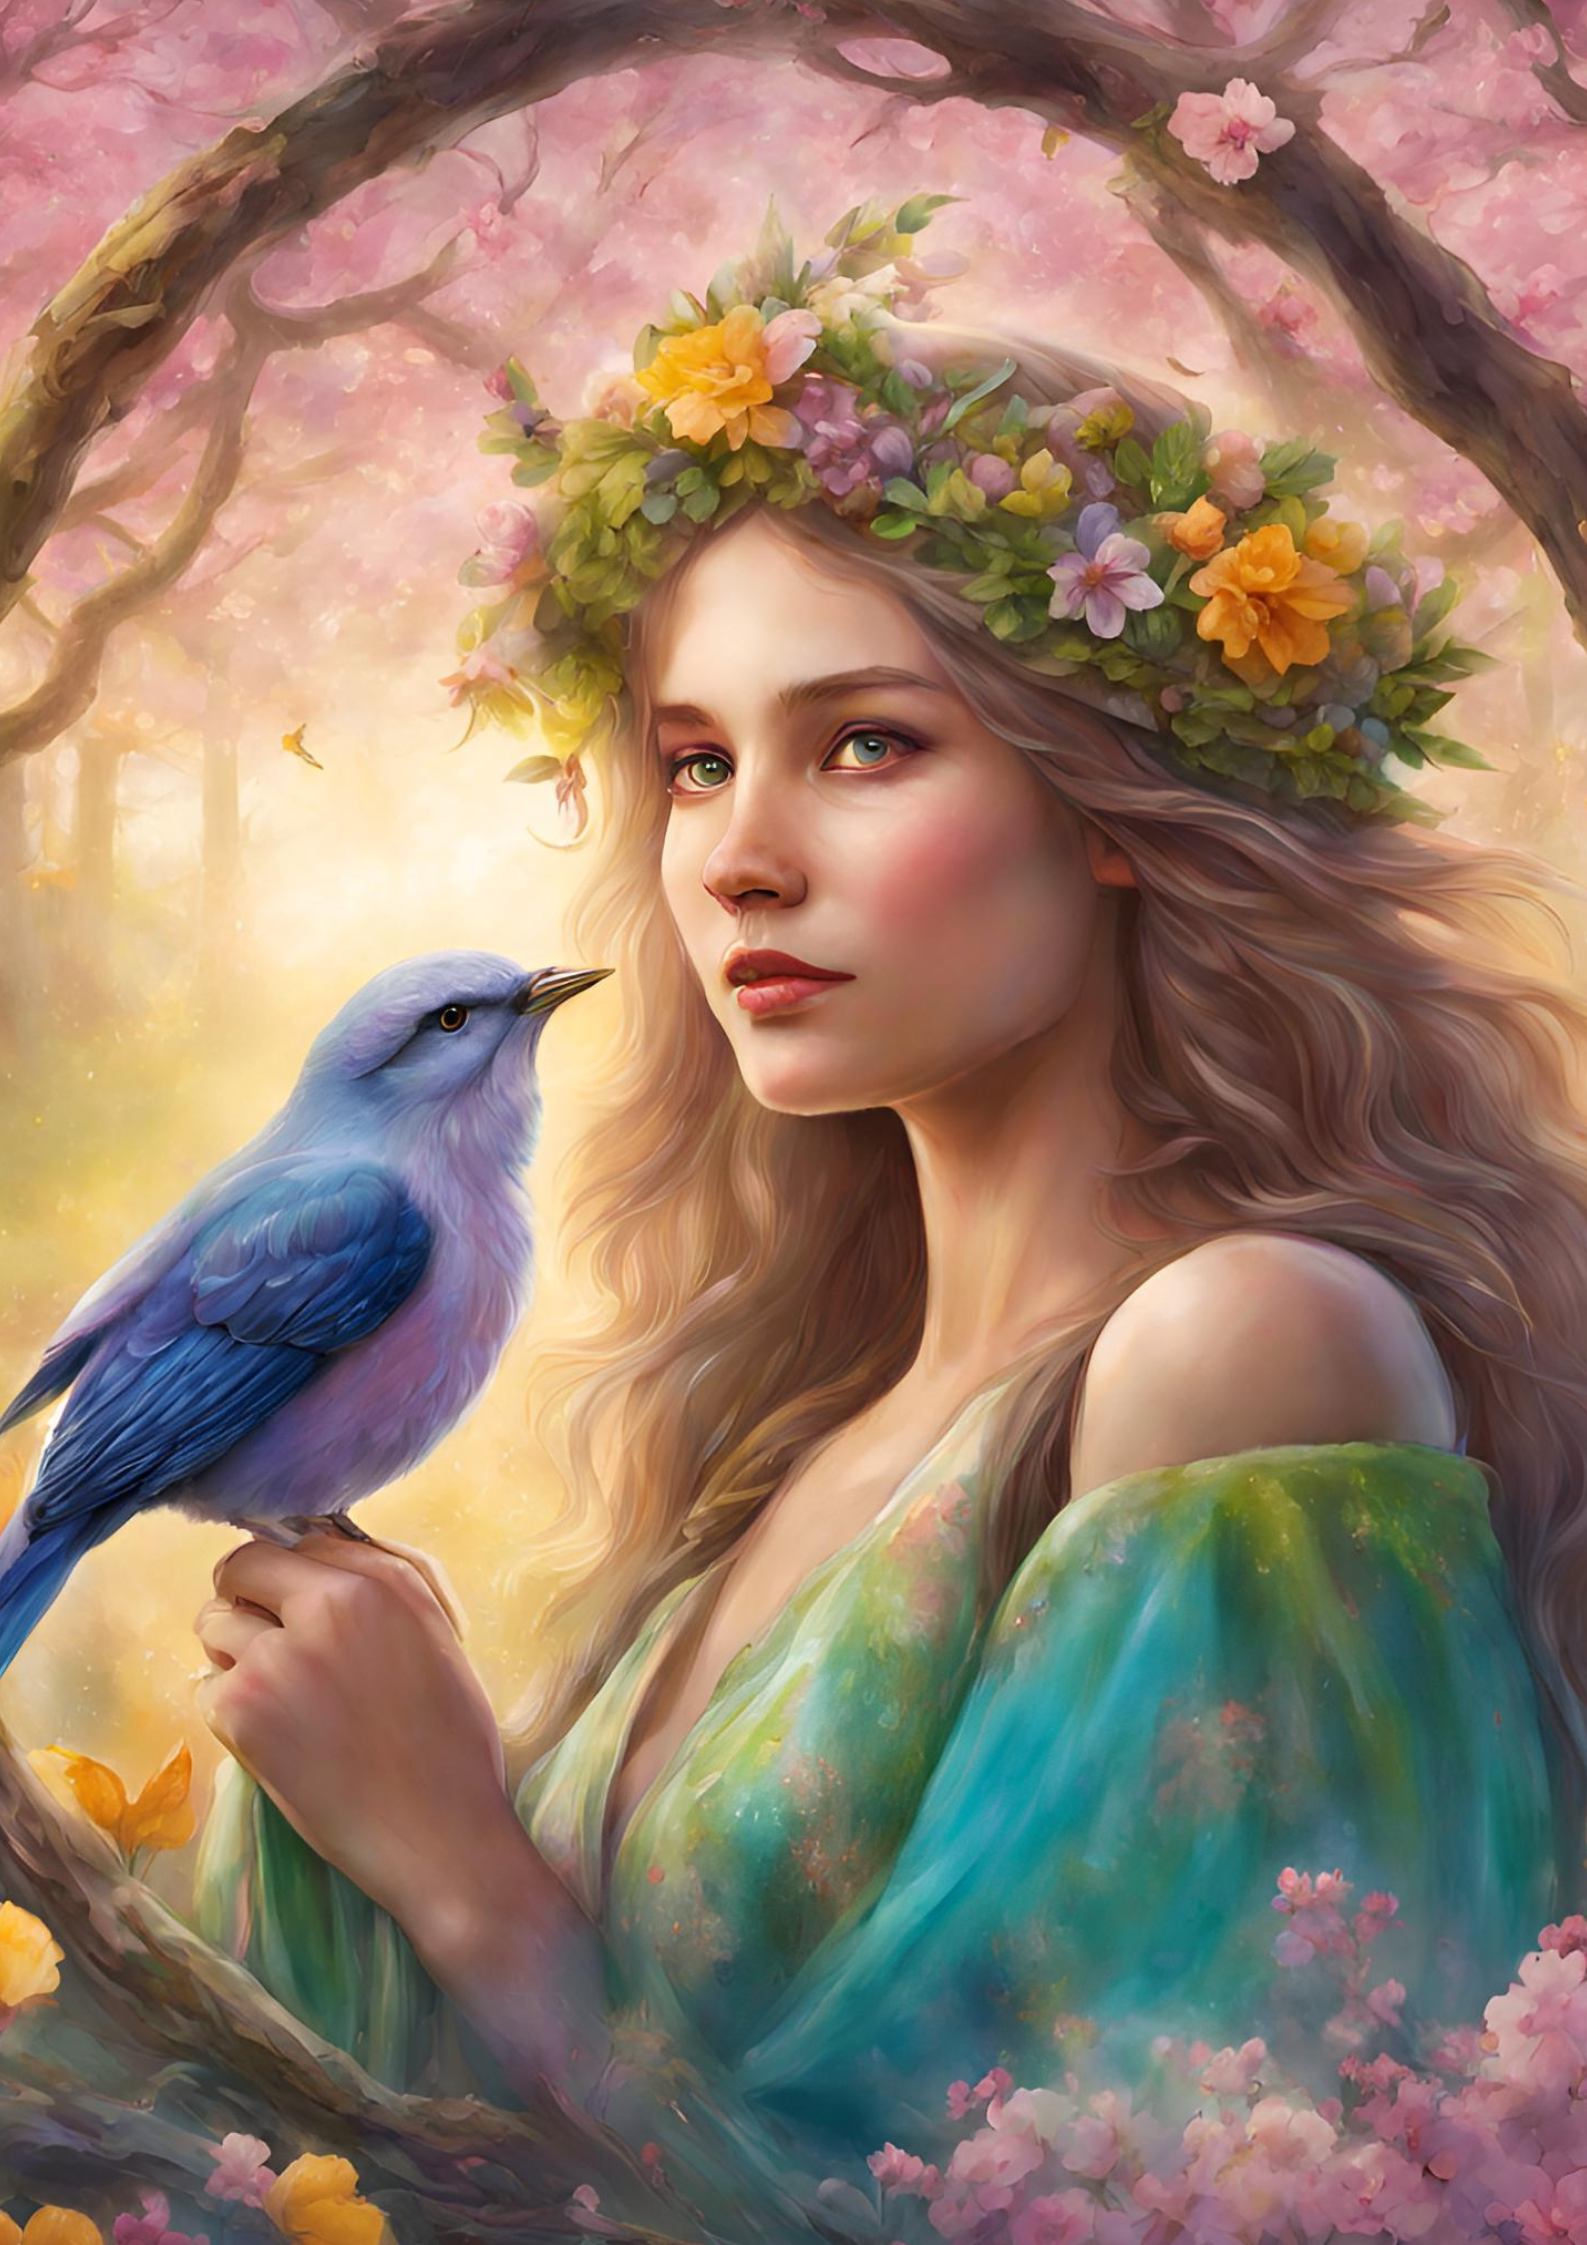 vivid and festive images capturing the essence of Ostara, the pagan festival celebrating spring equinox. Envision scenes of nature awakening, with vibrant colors of blossoming flowers, budding trees, chirping birds and woman<br />
Jahreskreisfest Ostara